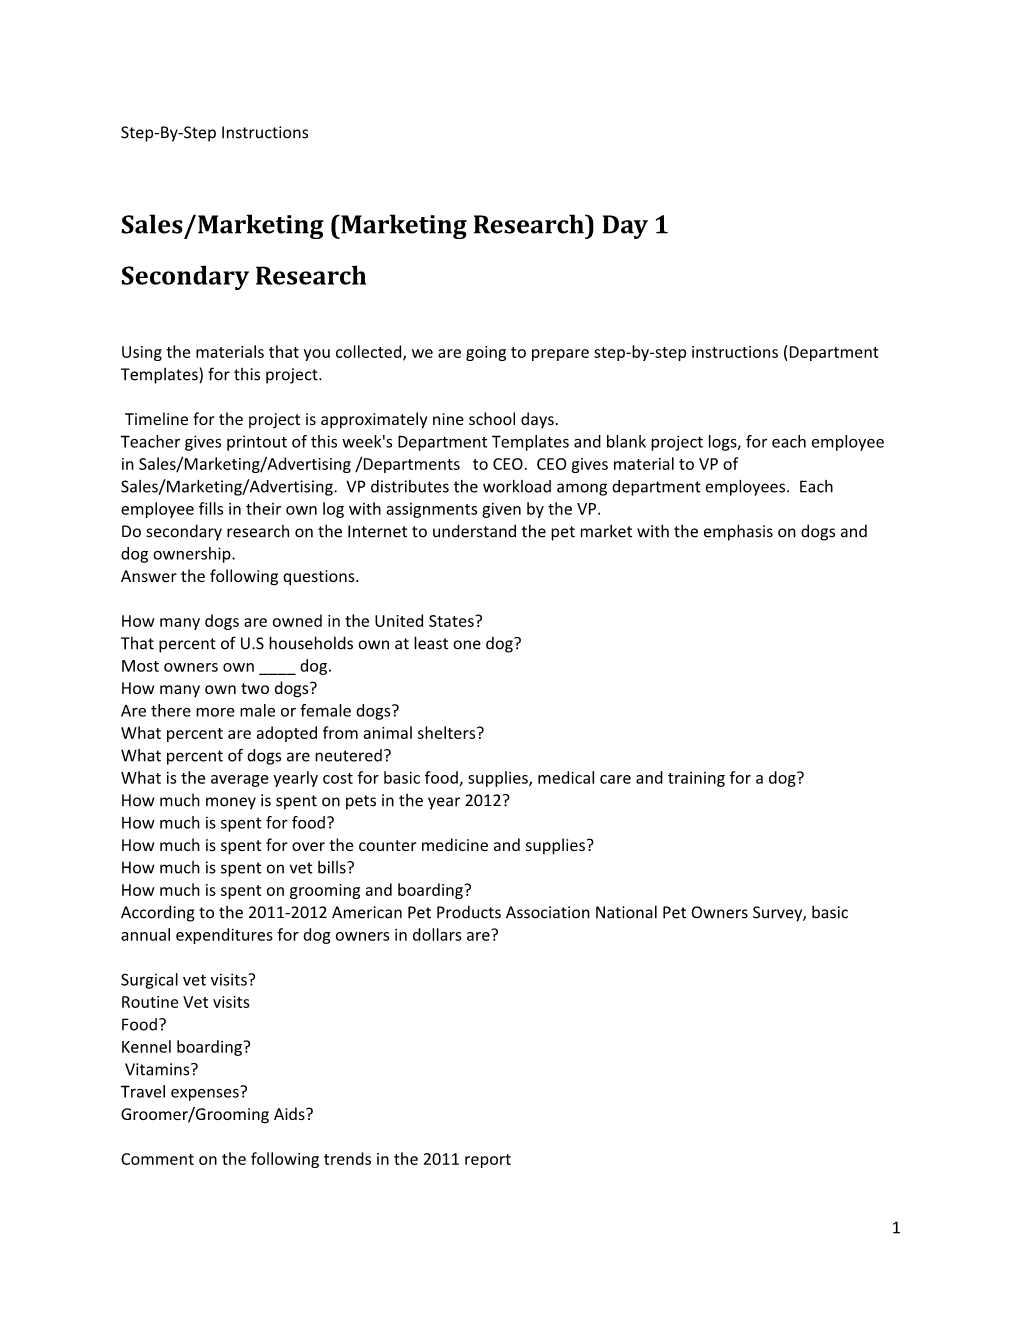 Sales/Marketing (Marketing Research) Day 1